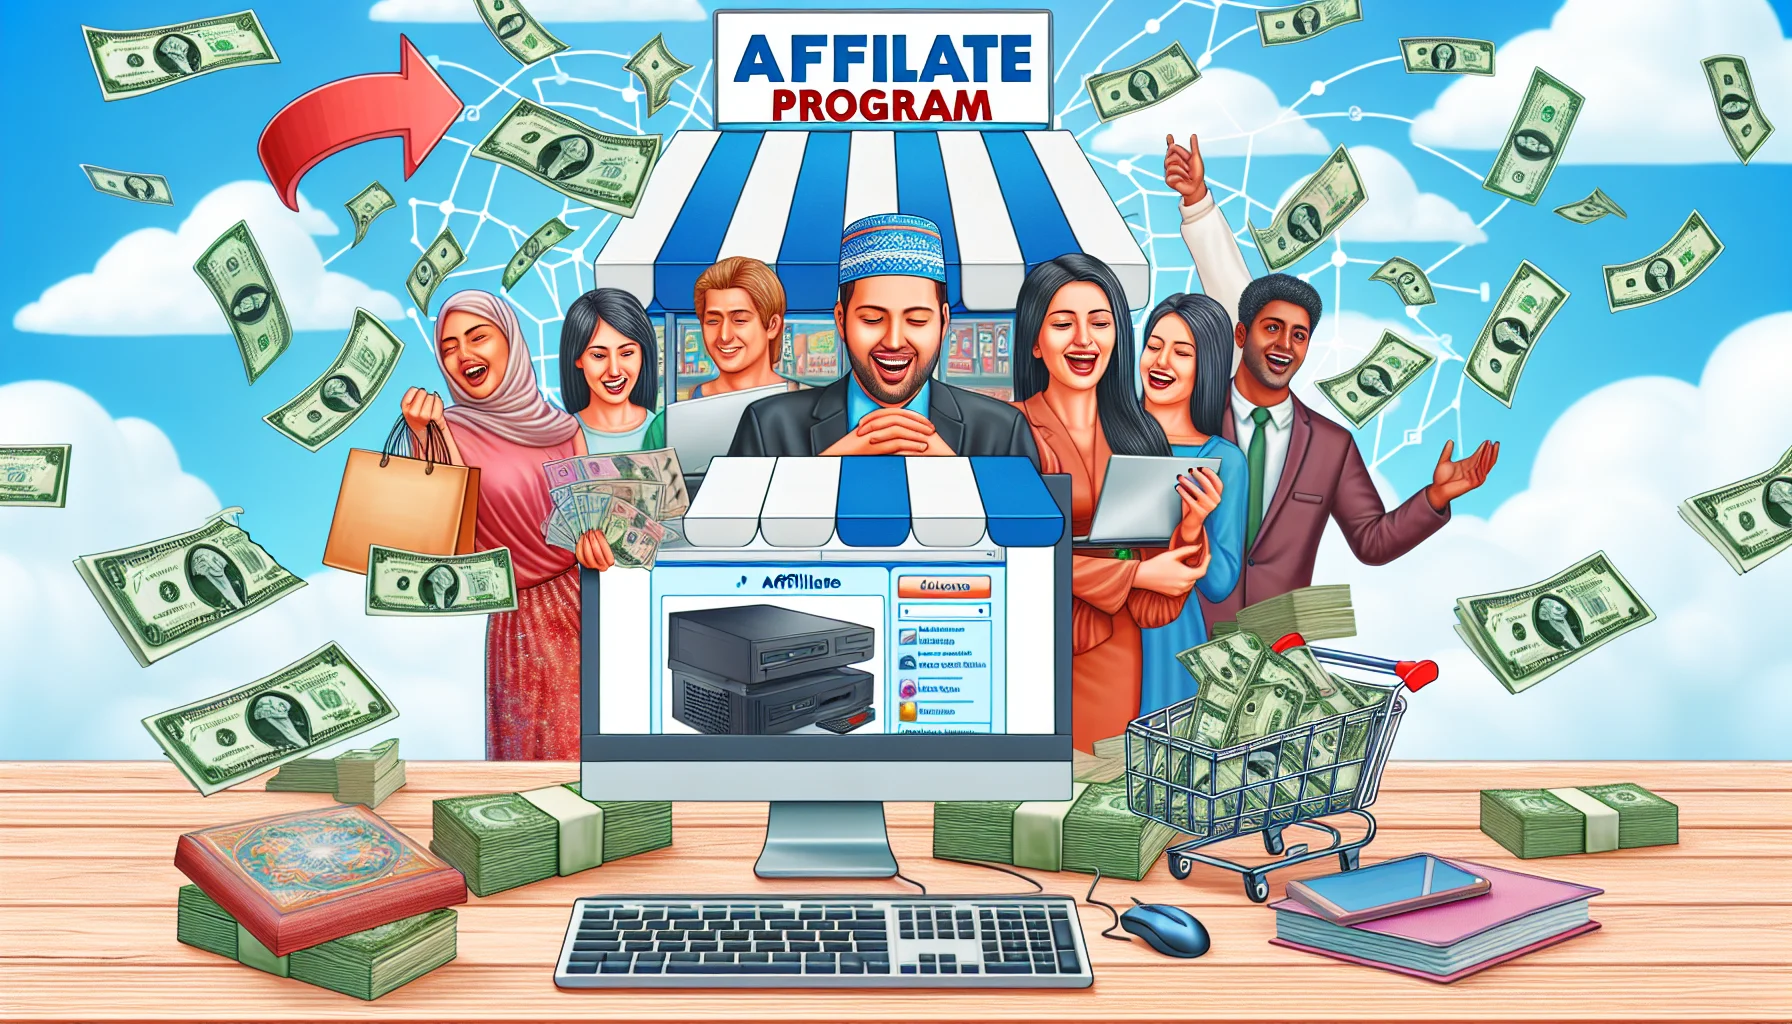 Create a humorous and realistic scene depicting an affiliate program in a general retail setting, enticingly linked to the concept of making money online. This may include graphics of computers, online transactions, and a flow of money stemming from a retail shop to online users. People participating in the affiliate program could be diverse, including a Middle-Eastern woman looking at her computer with pleasure, and South Asian man joyfully counting online money.